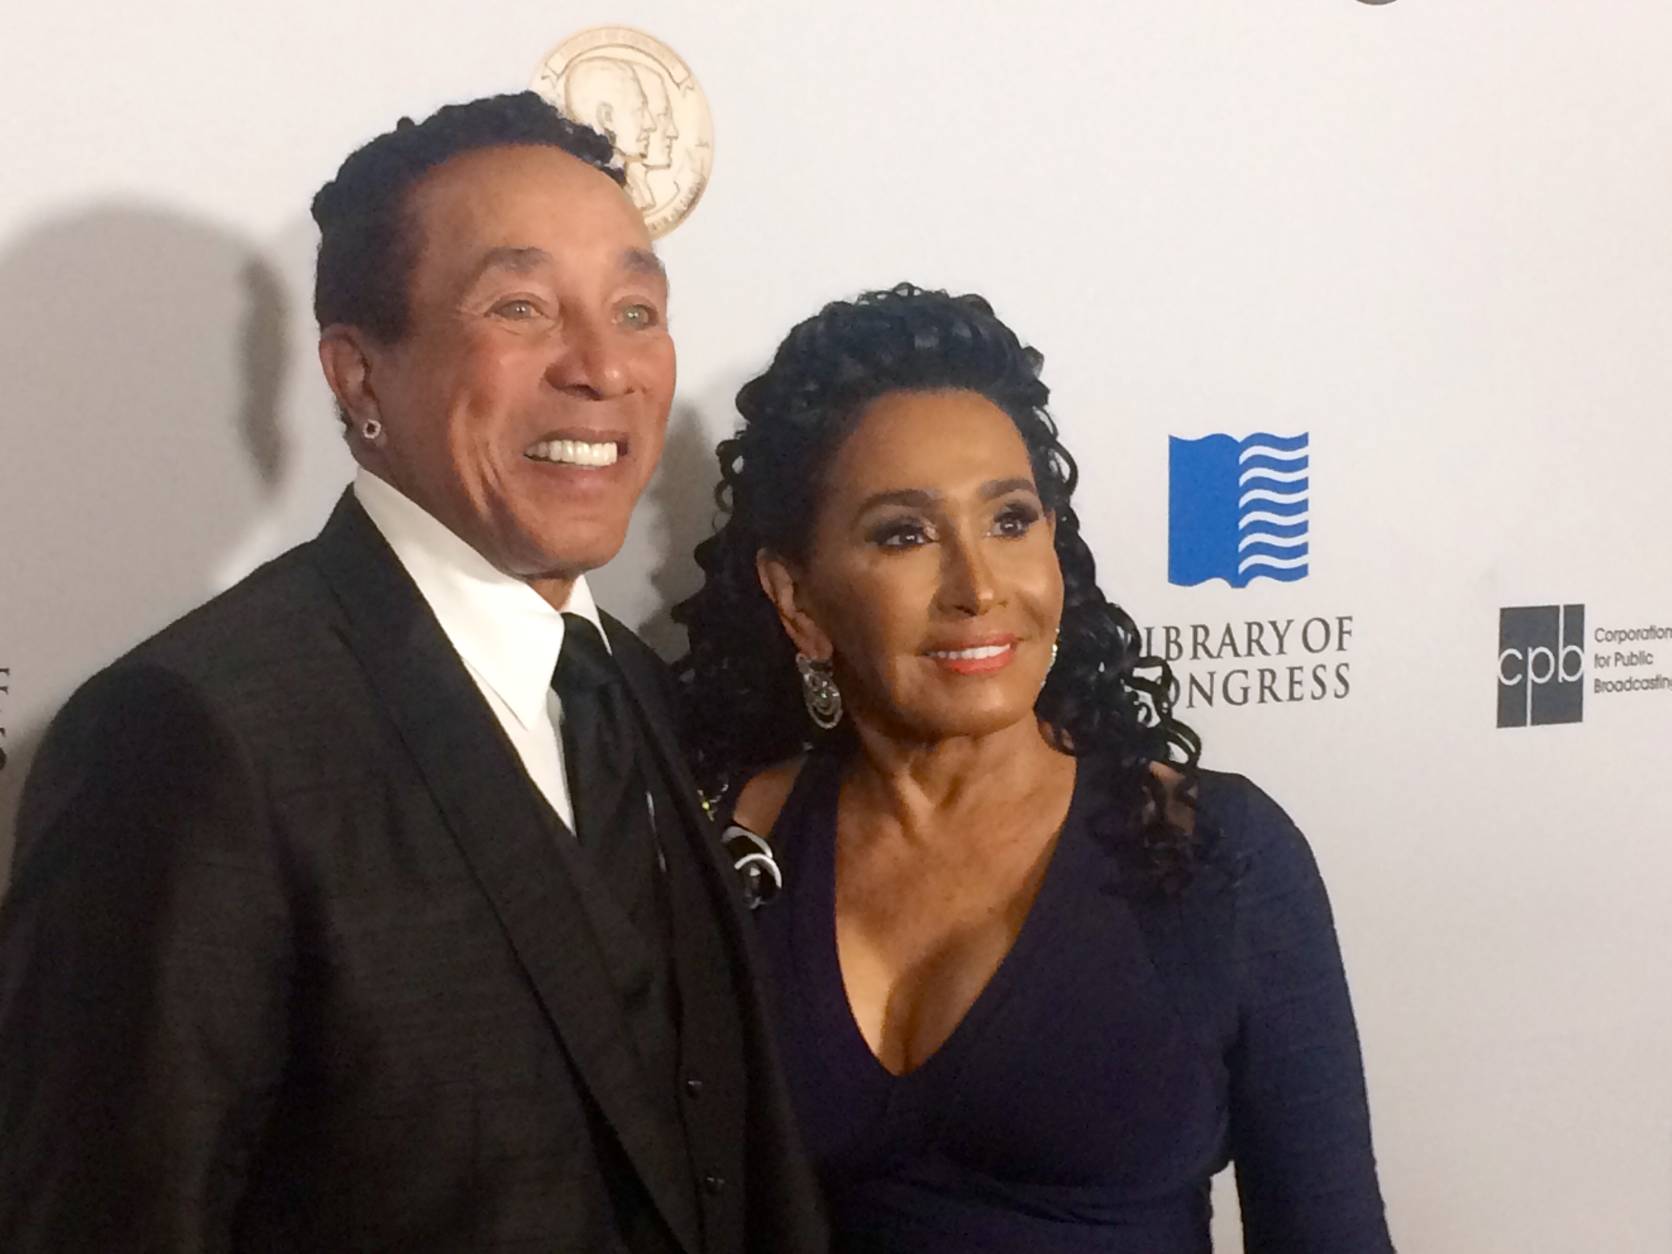 Smokey Robinson arrives on the red carpet with wife Frances Robinson to receive the Library of Congress' Gershwin Prize at DAR Constitution Hall on Wednesday night. (WTOP/Jason Fraley)